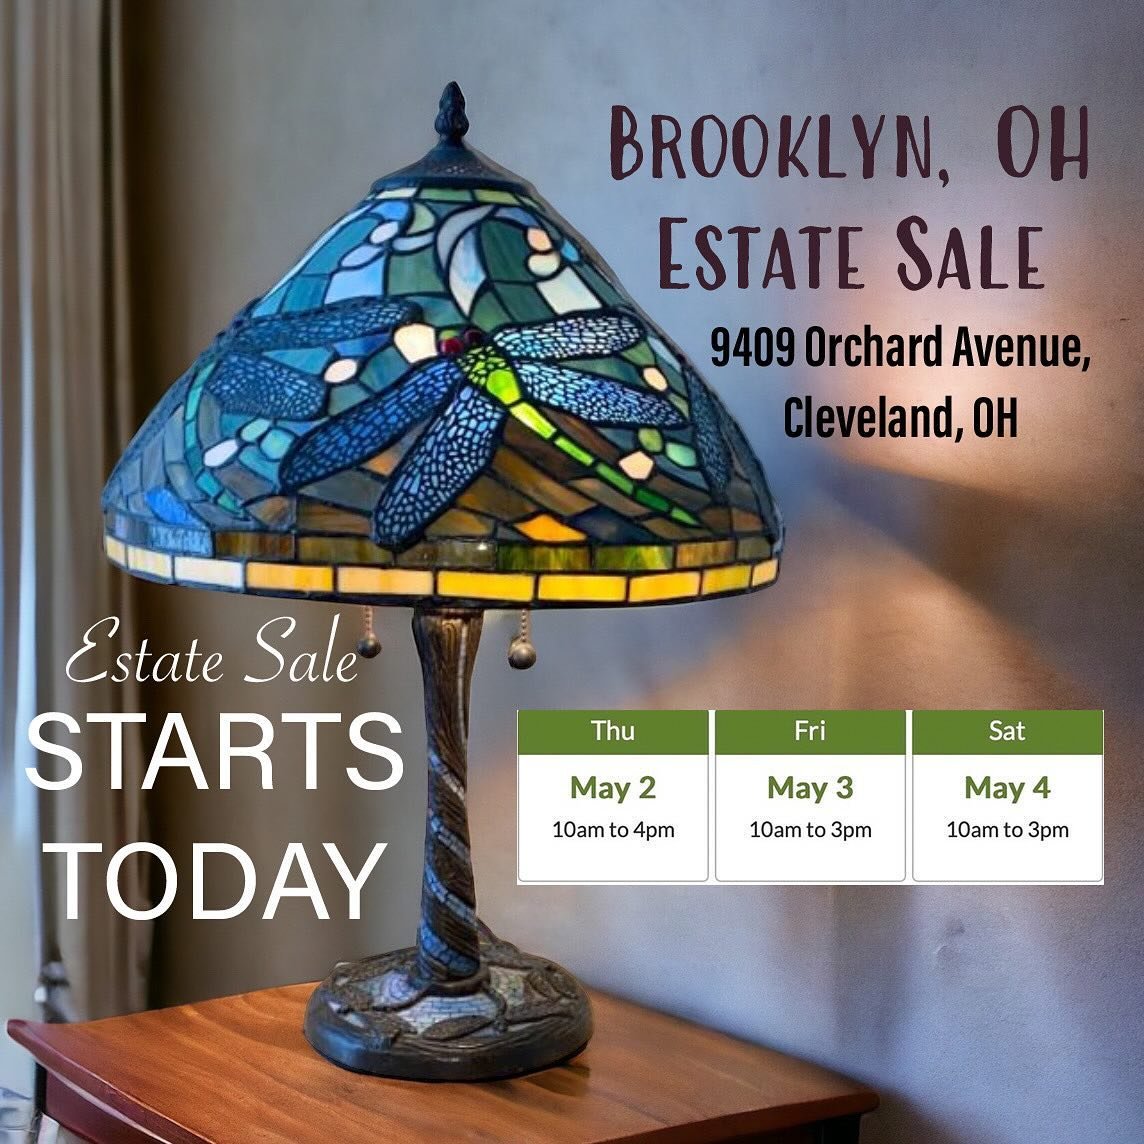 Starts (Thursday 5/2) TODAY! 9409 Orchard Avenue, Cleveland, OH. Make sure to add this 3 day Brooklyn neighborhood/ Cleveland OH 44144 estate sale on your calendar! It will start 5/2 and last day will be Sat 5/4.
Check out estatesales.net for more de